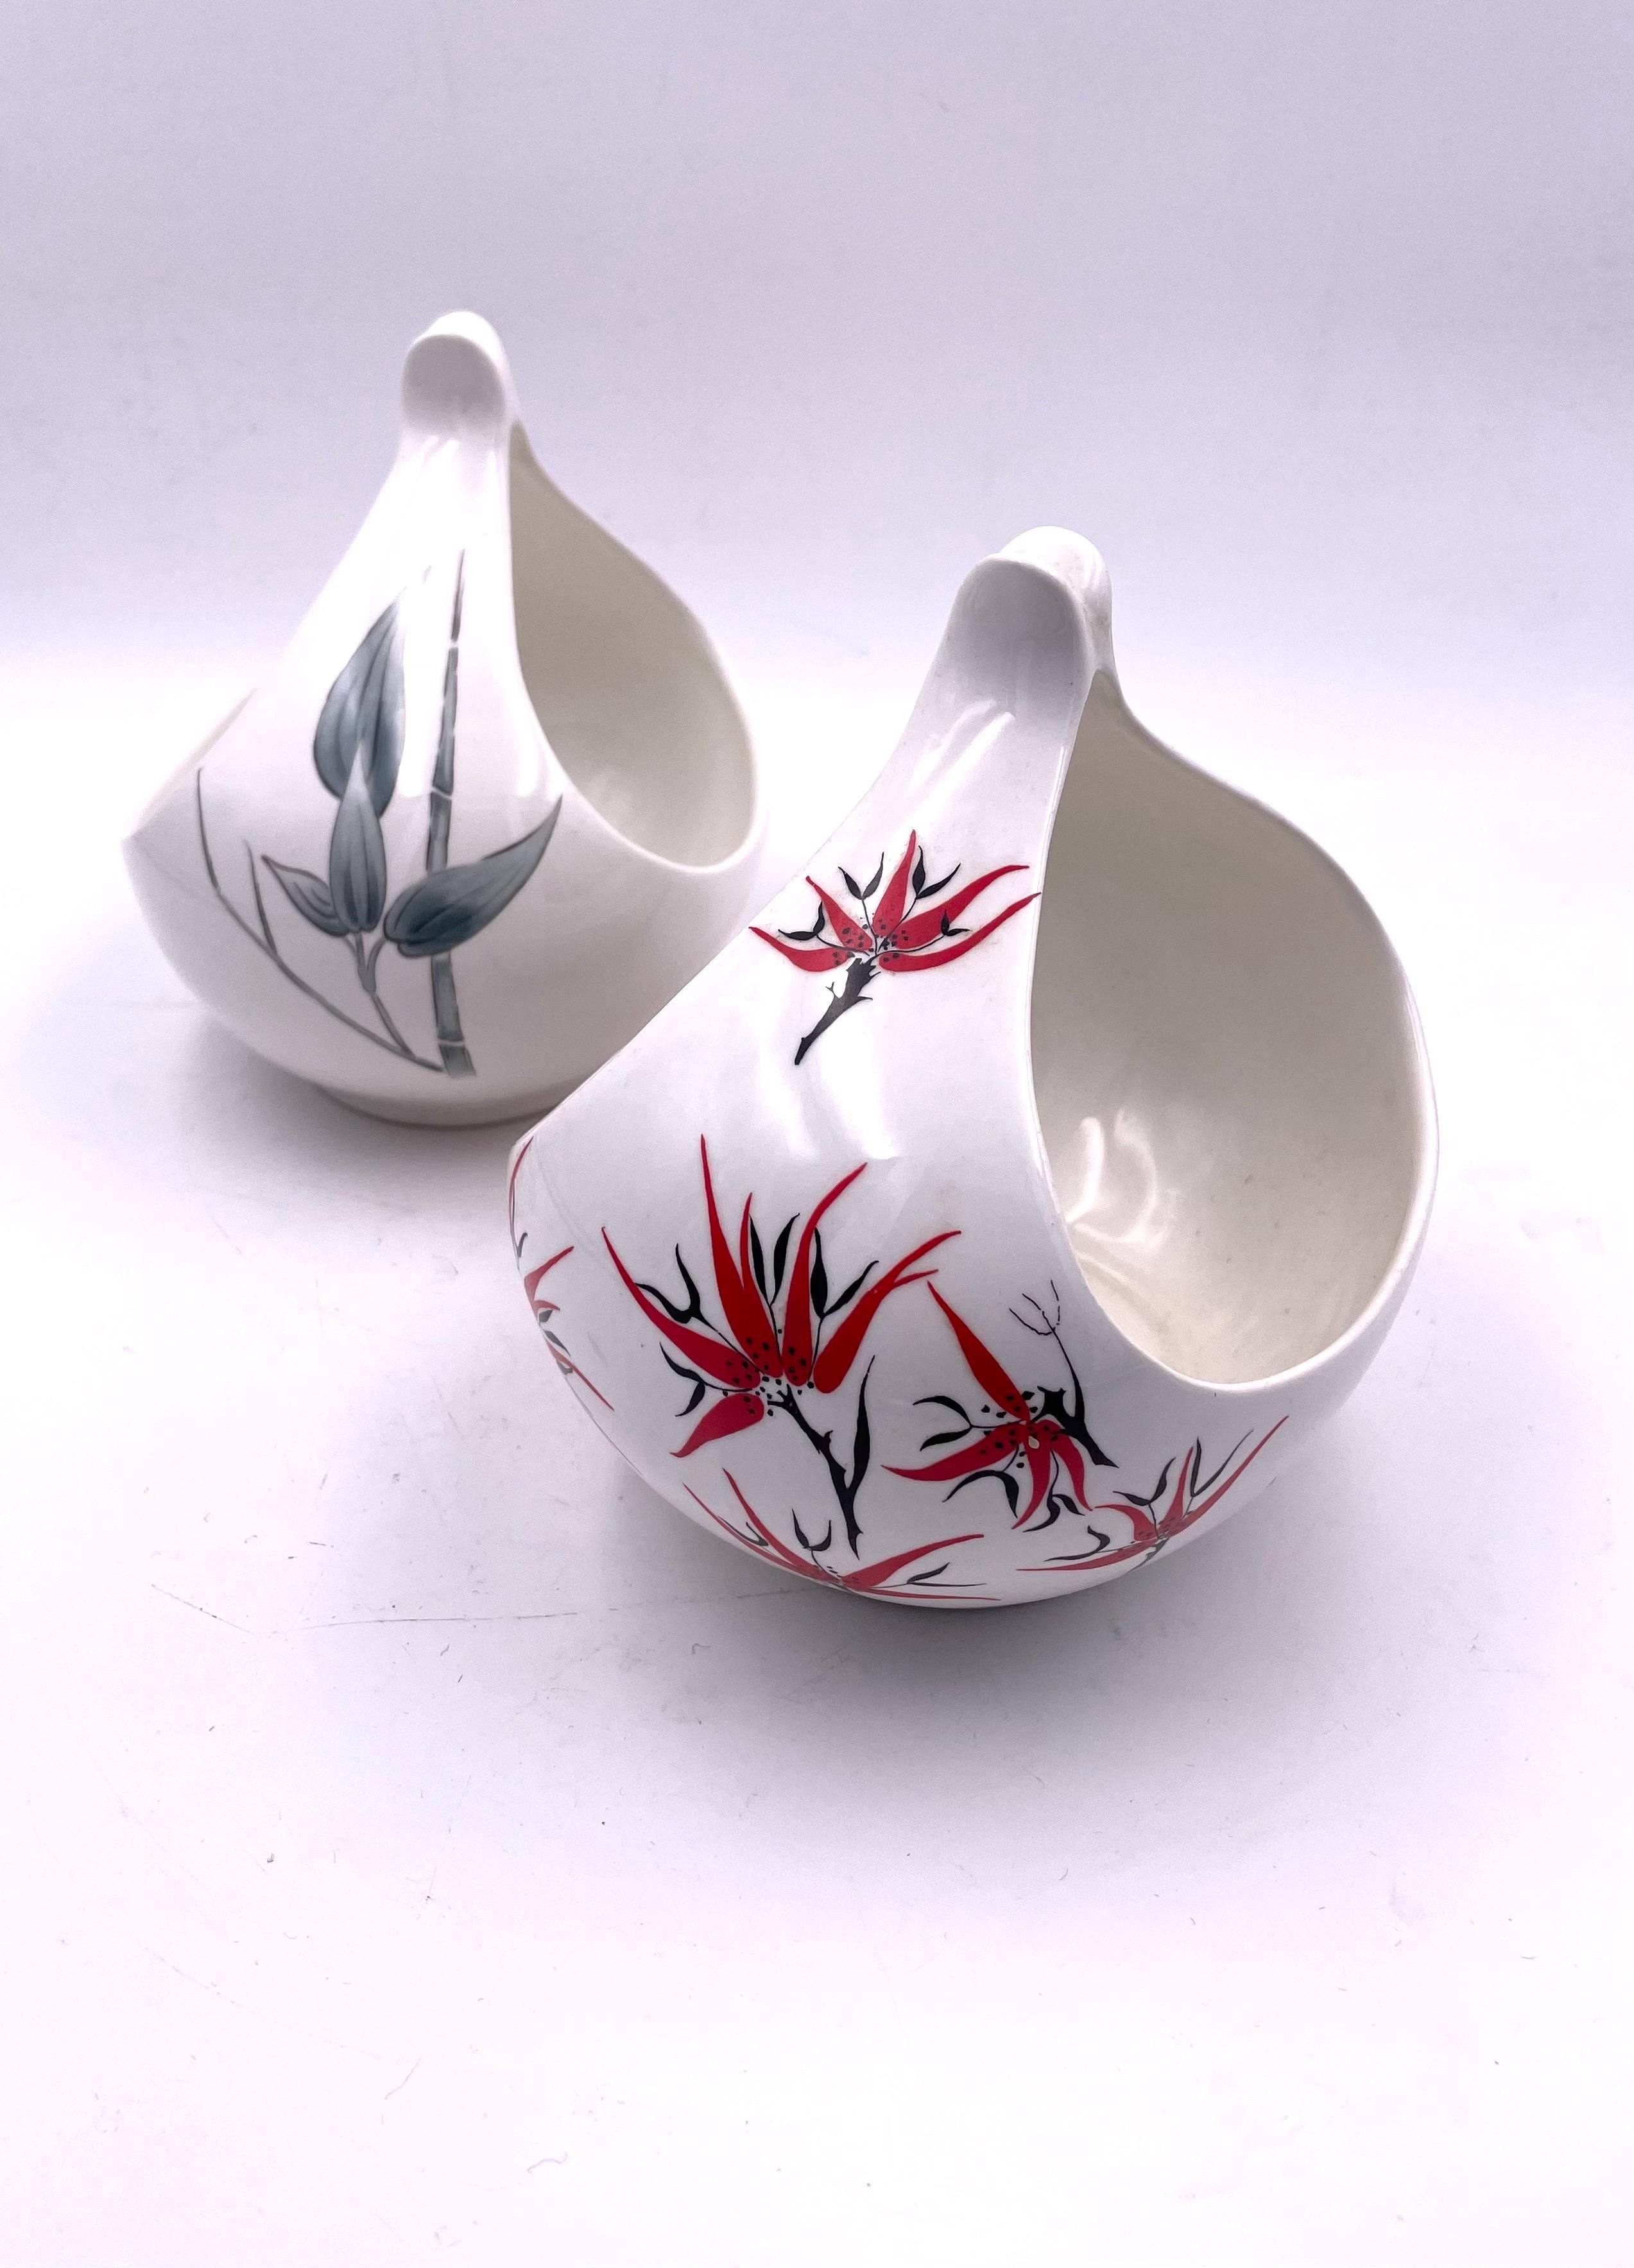 Beautiful design and prints, by Eva Zeisel for Hallcraft porcelain bowls can be sold separate buyer can buy 1 or 2 great conditions no chips or cracks.